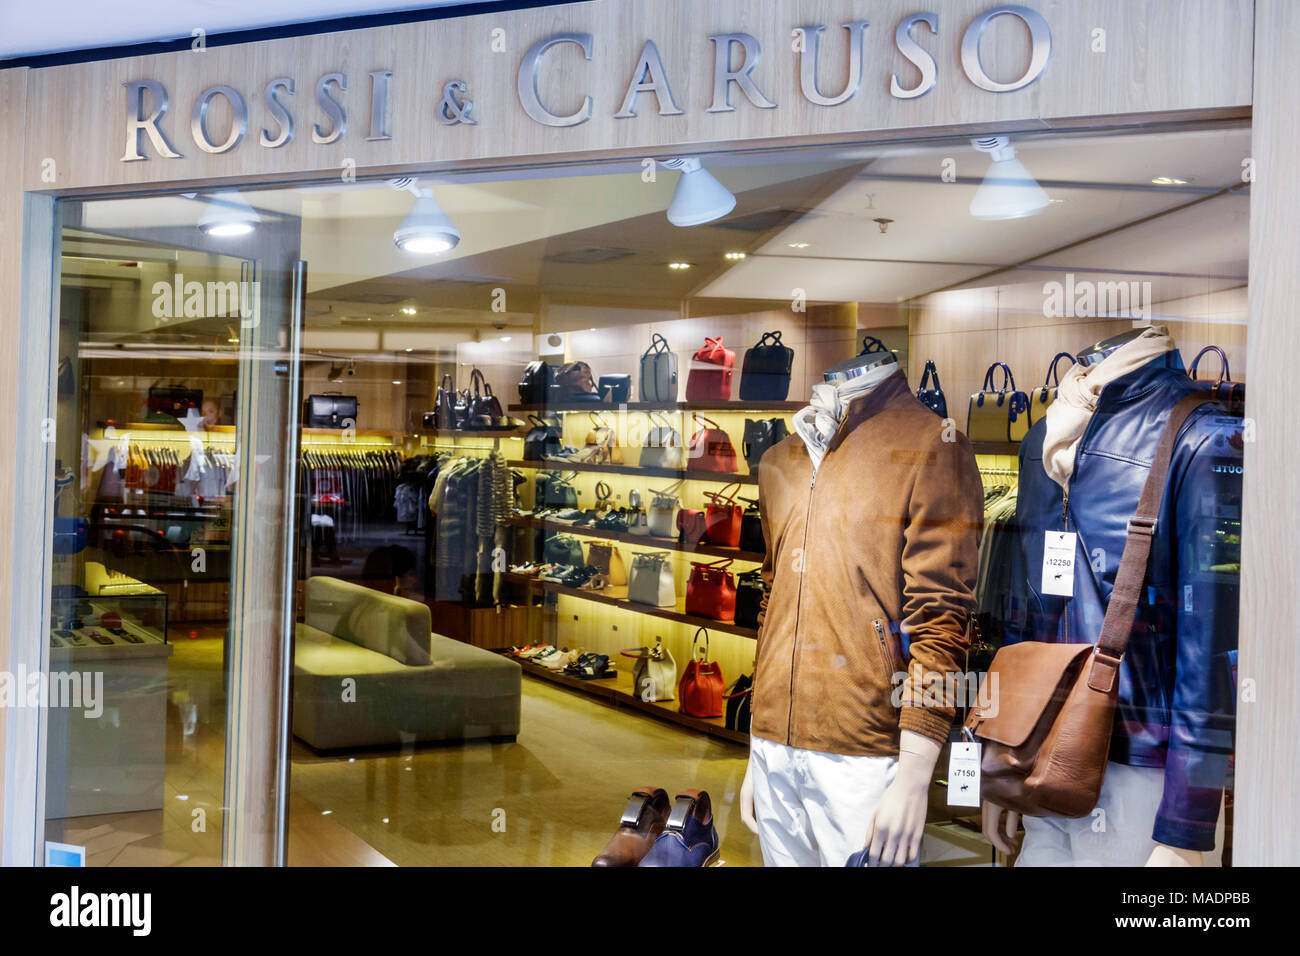 Buenos Aires Argentina,Recoleta mall,Rossi & Caruso,designer boutique,leather goods,handbag purse pocketbooks,jackets,window,visitors travel traveling Stock Photo